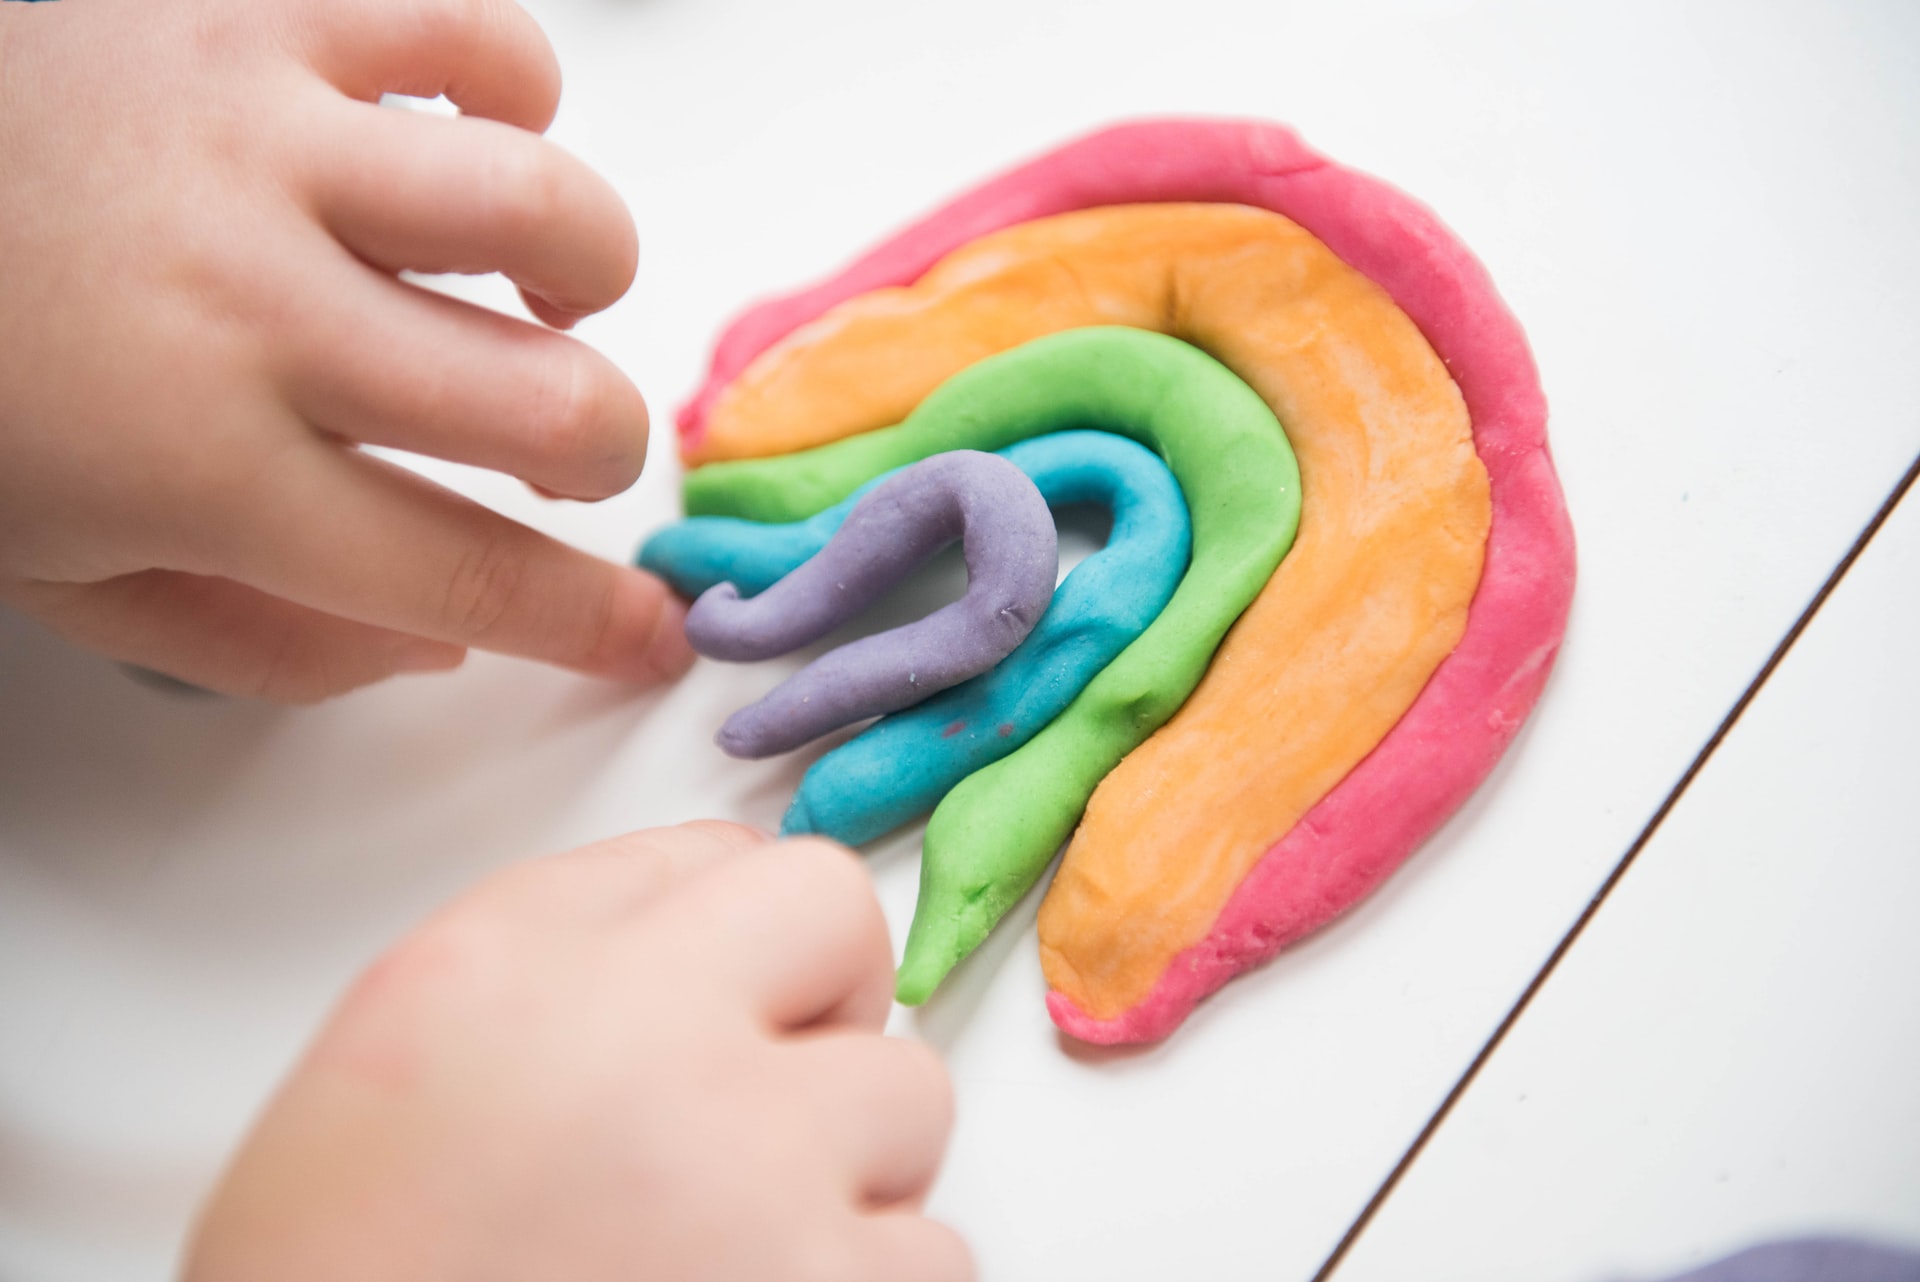 Making a rainbow from Playdoh